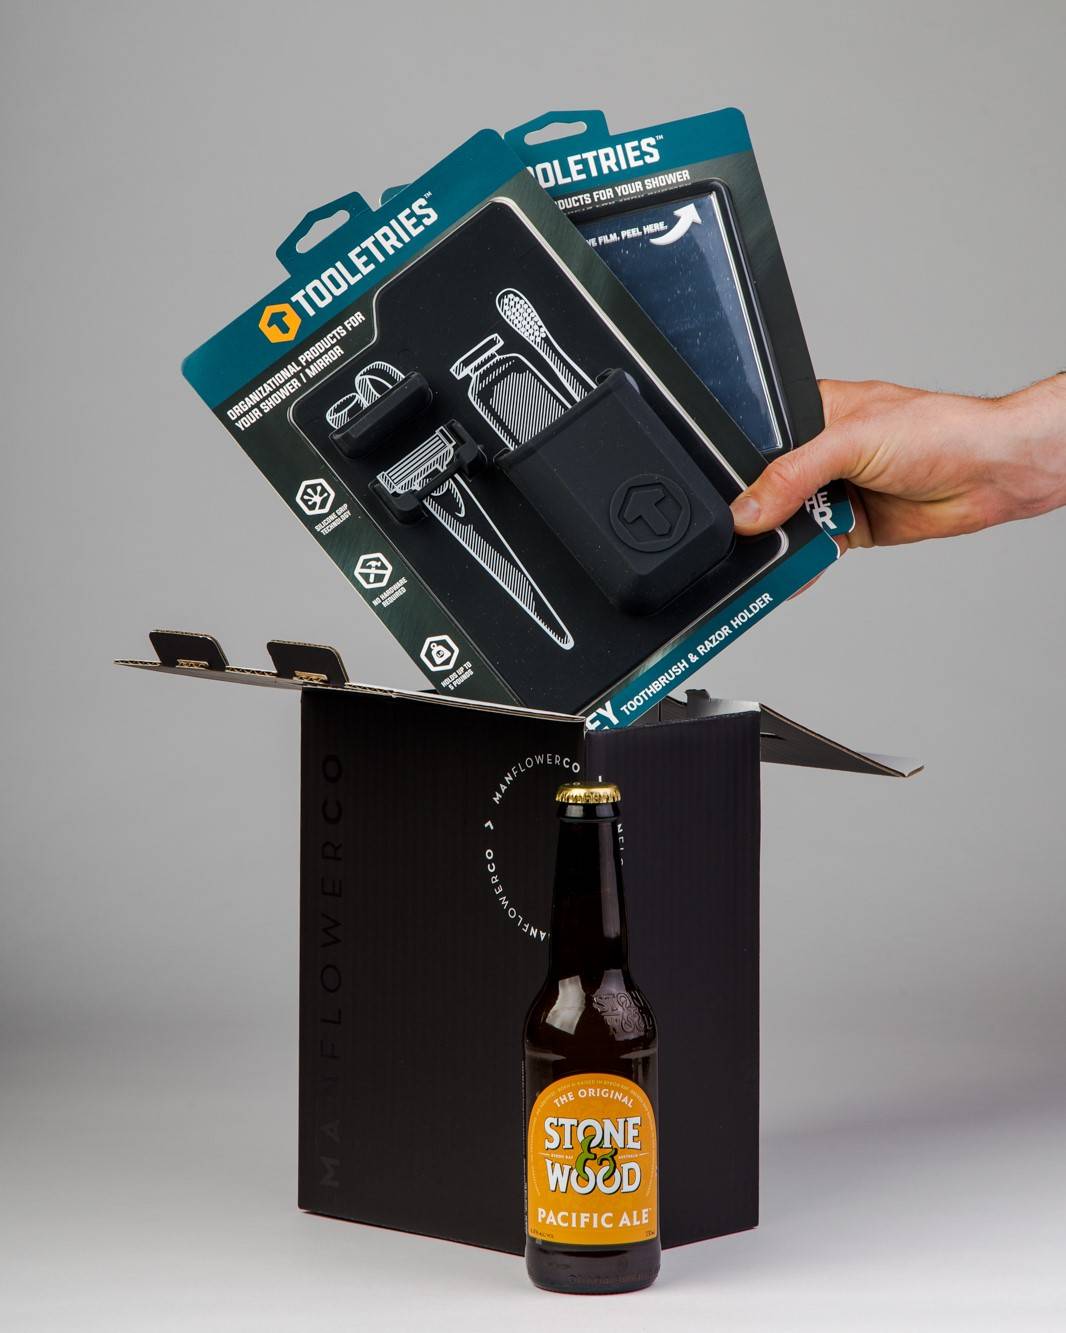 Tooletries + Beer, part of Manflower Co's range of Valentine's Day gifts for men.